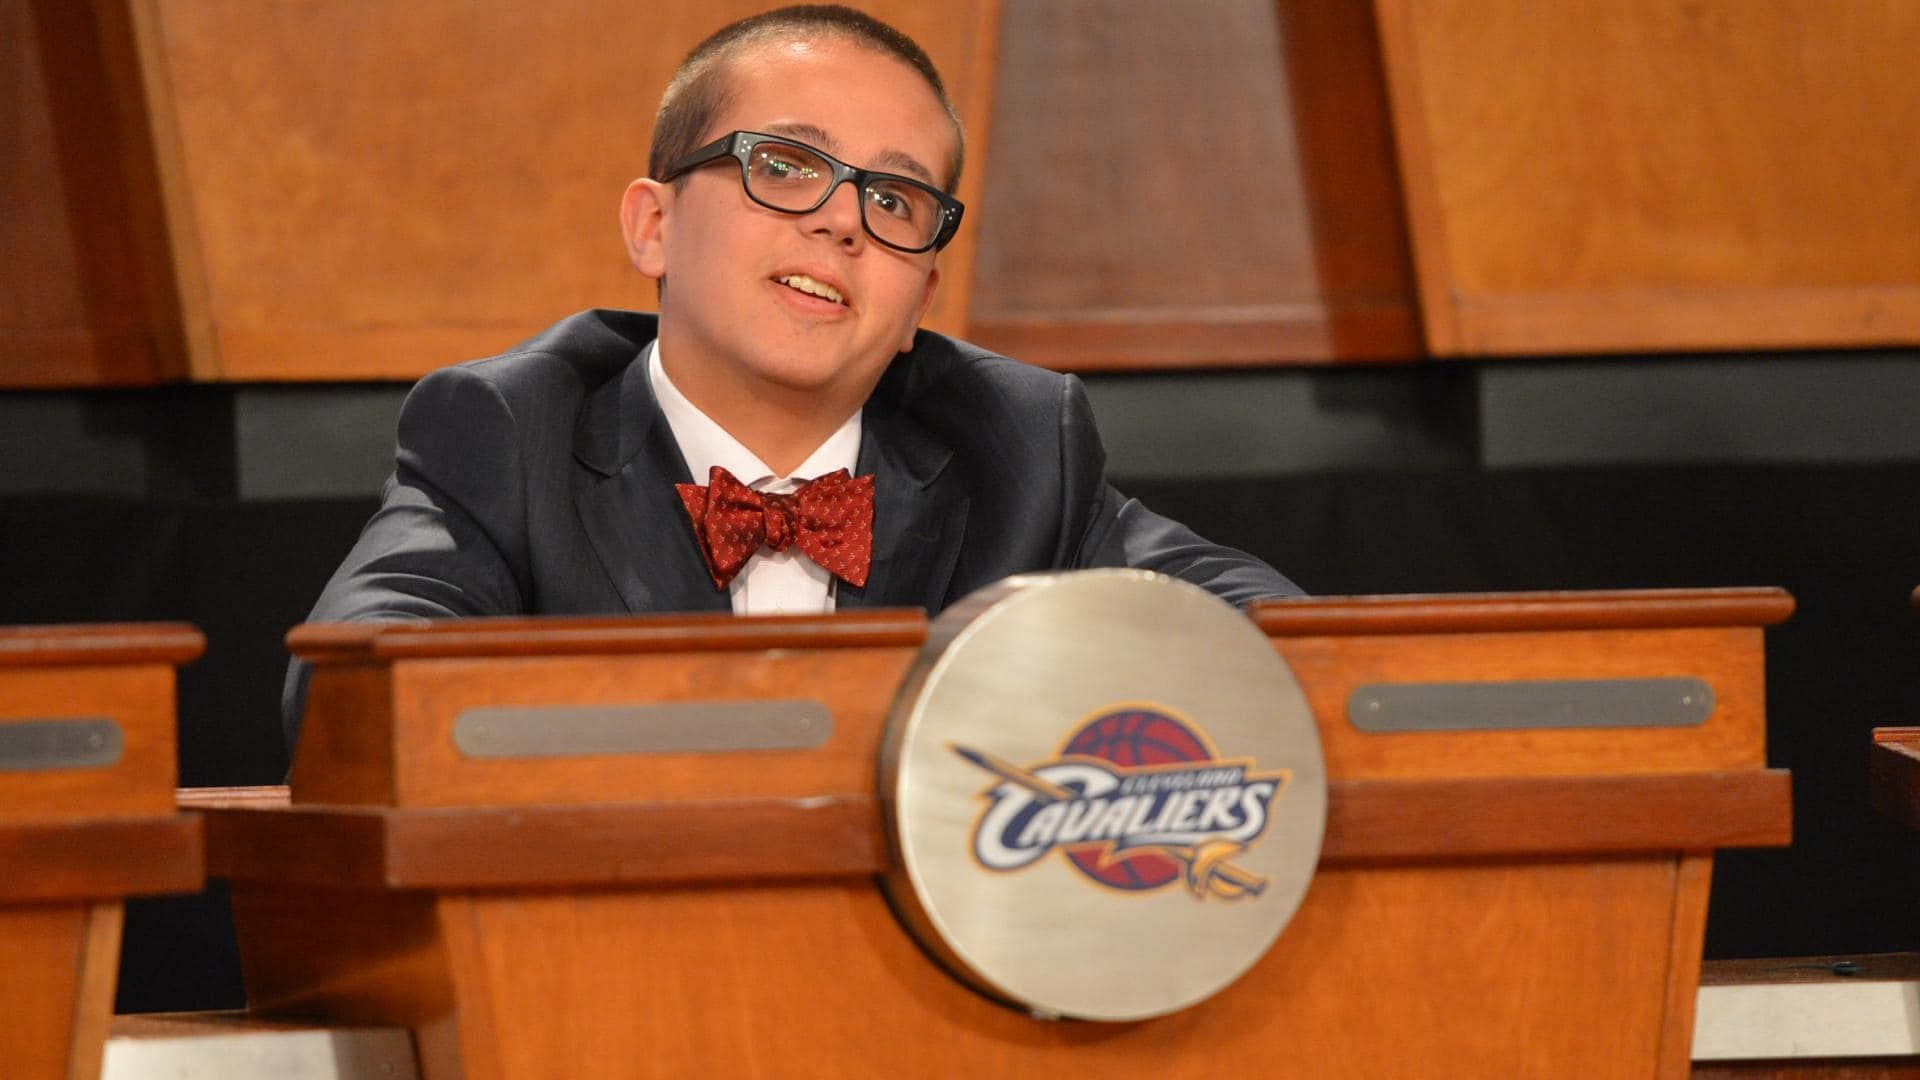 Nick Gilbert, the late son of Cleveland Cavaliers owner Dan Gilbert